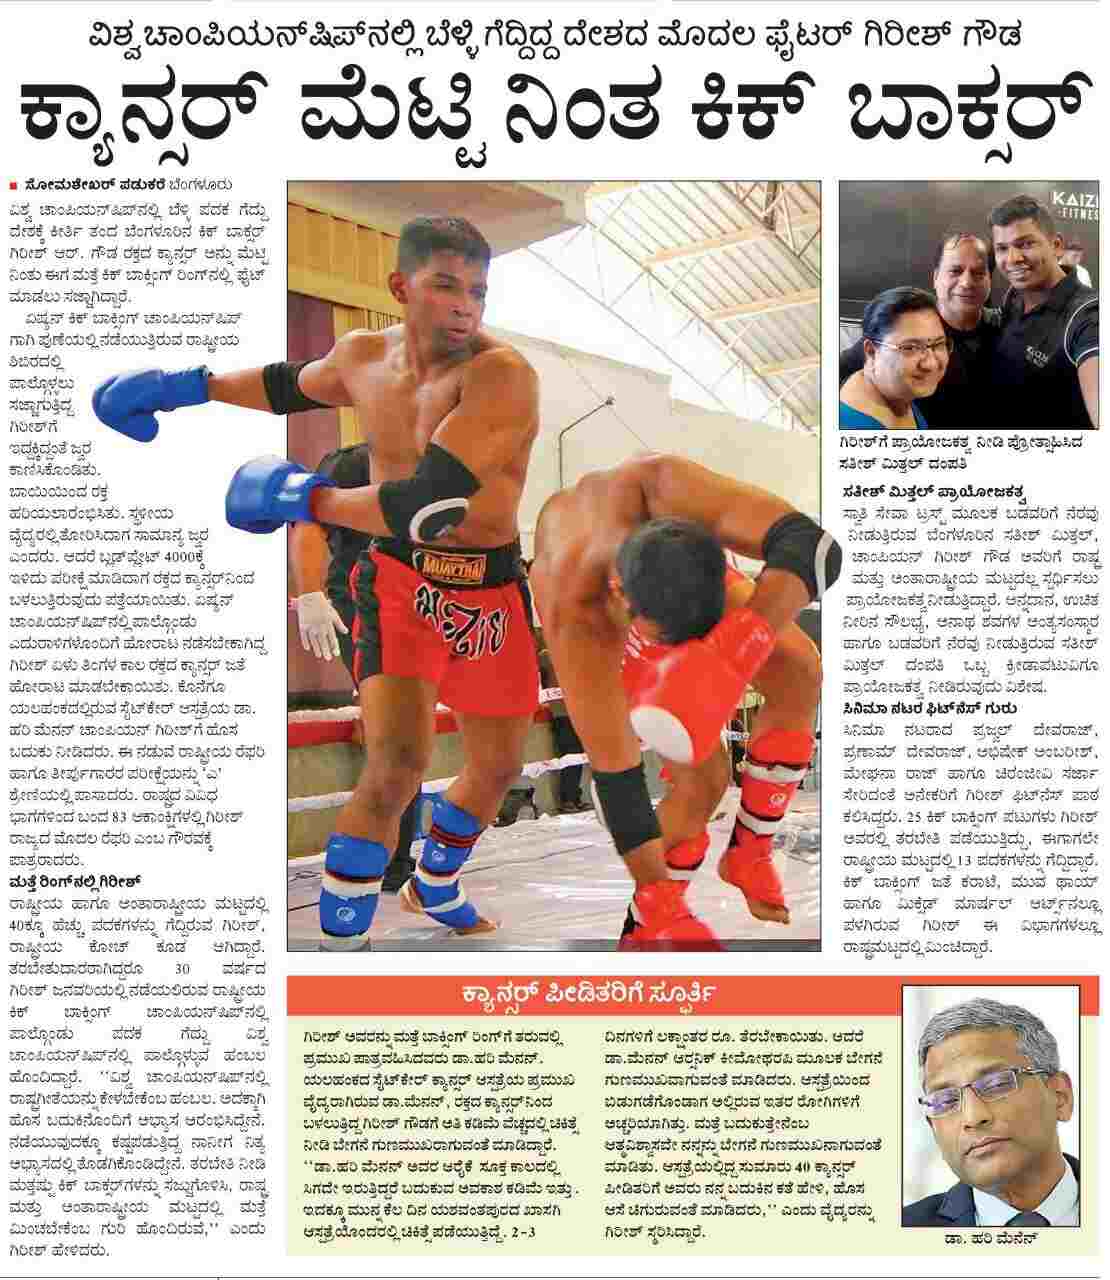 1st Fighter of the Country to Win Silver in the World Championships - News